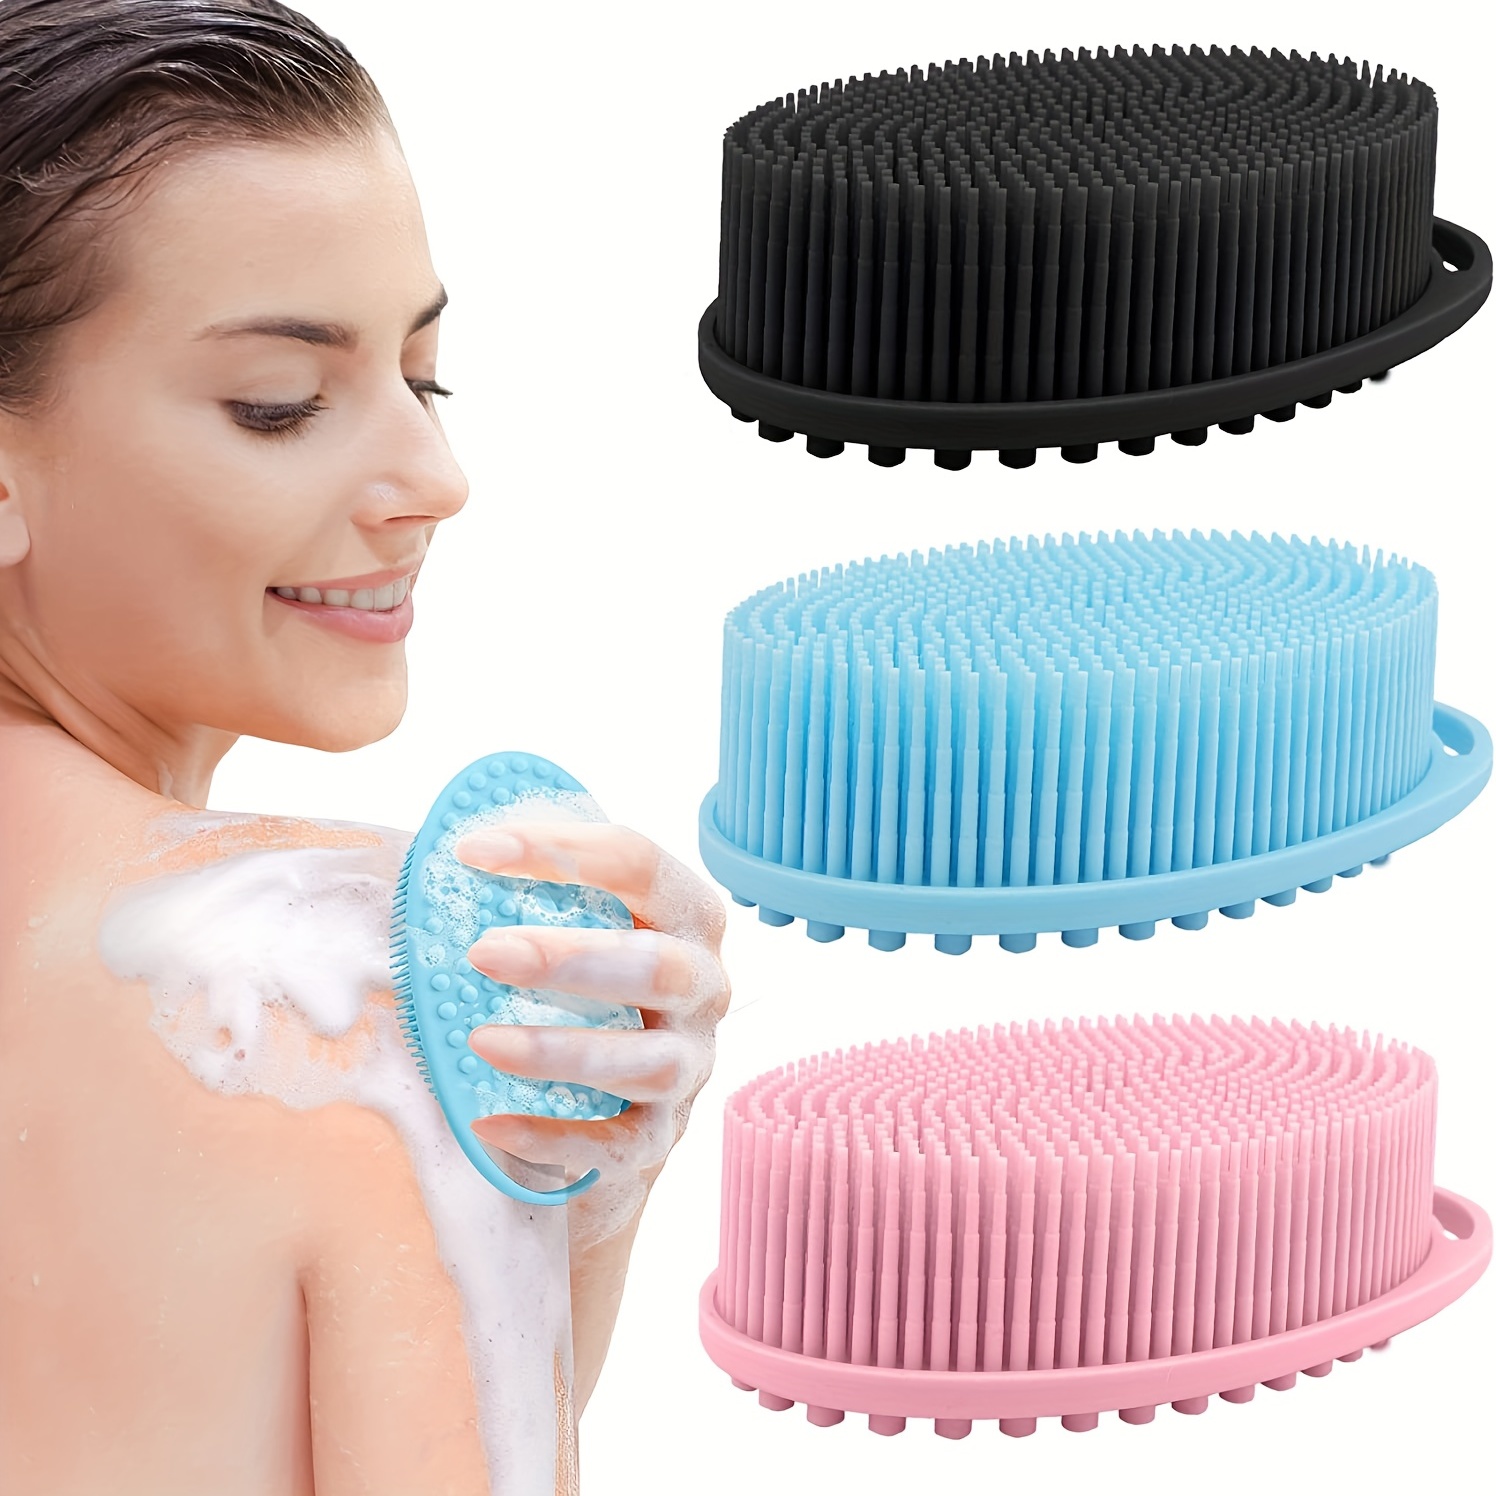 Silicone Shower Brush Back & Body Scrubber (Green, Pink, 2 Pack)